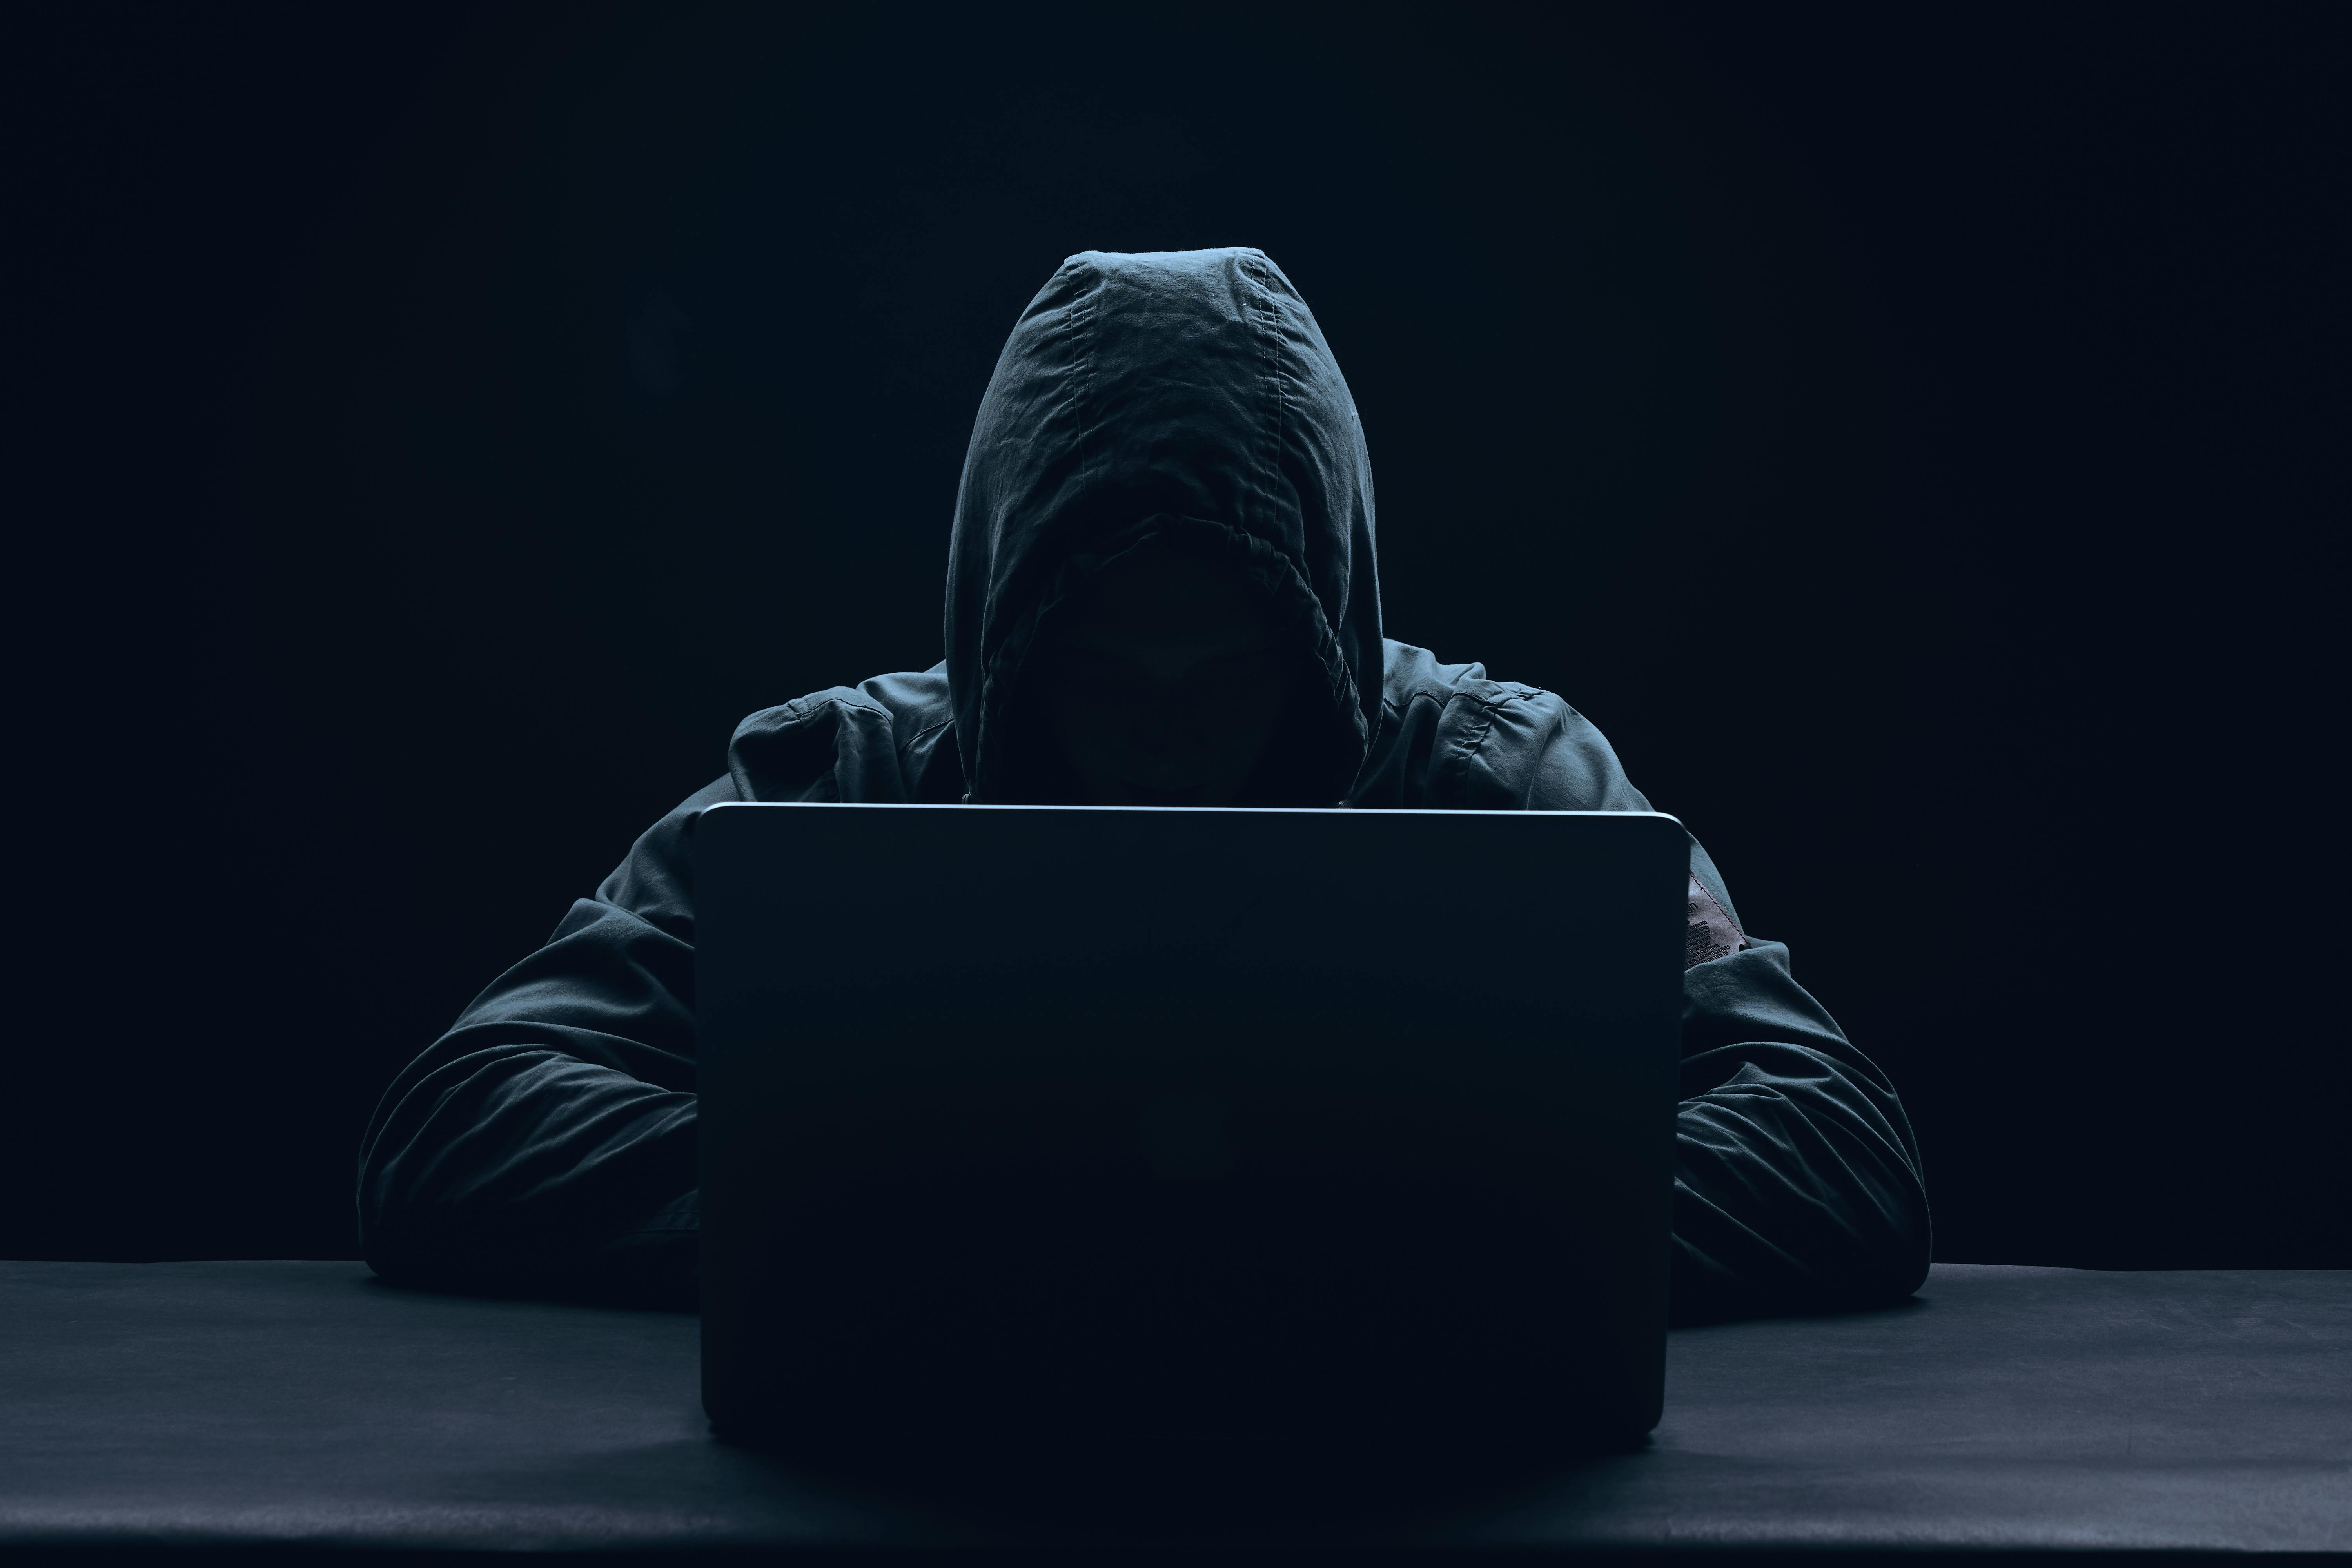 Hacker wearing a black hood, sitting in front of a computer